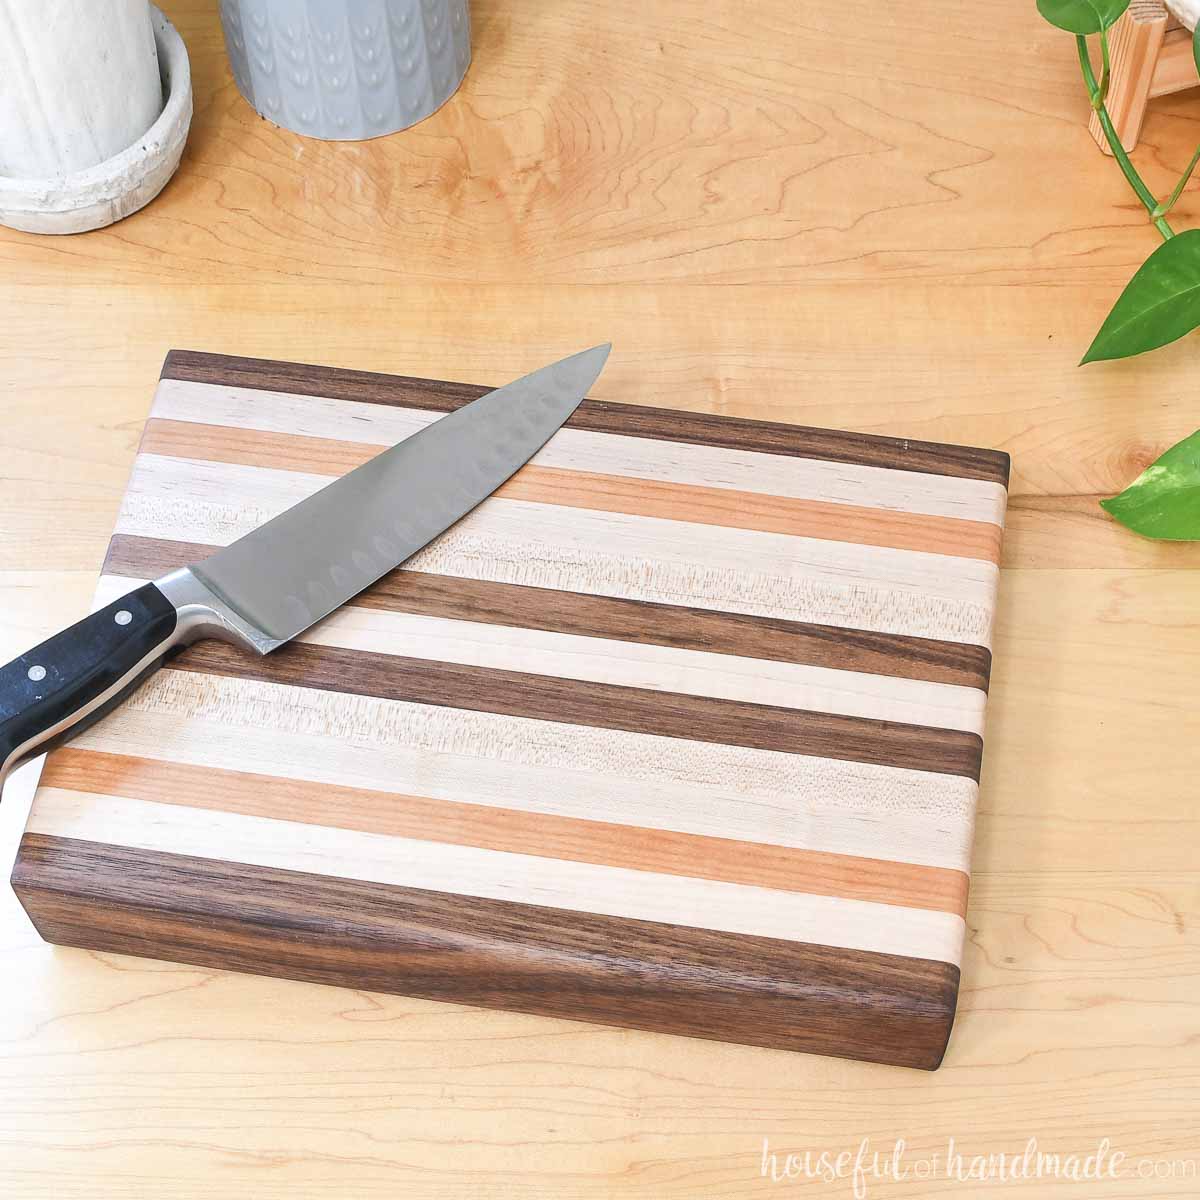 10x14 edge grain cutting board made from walnut, cherry and maple 1x2 boards with a chef's knife sitting on top of it.